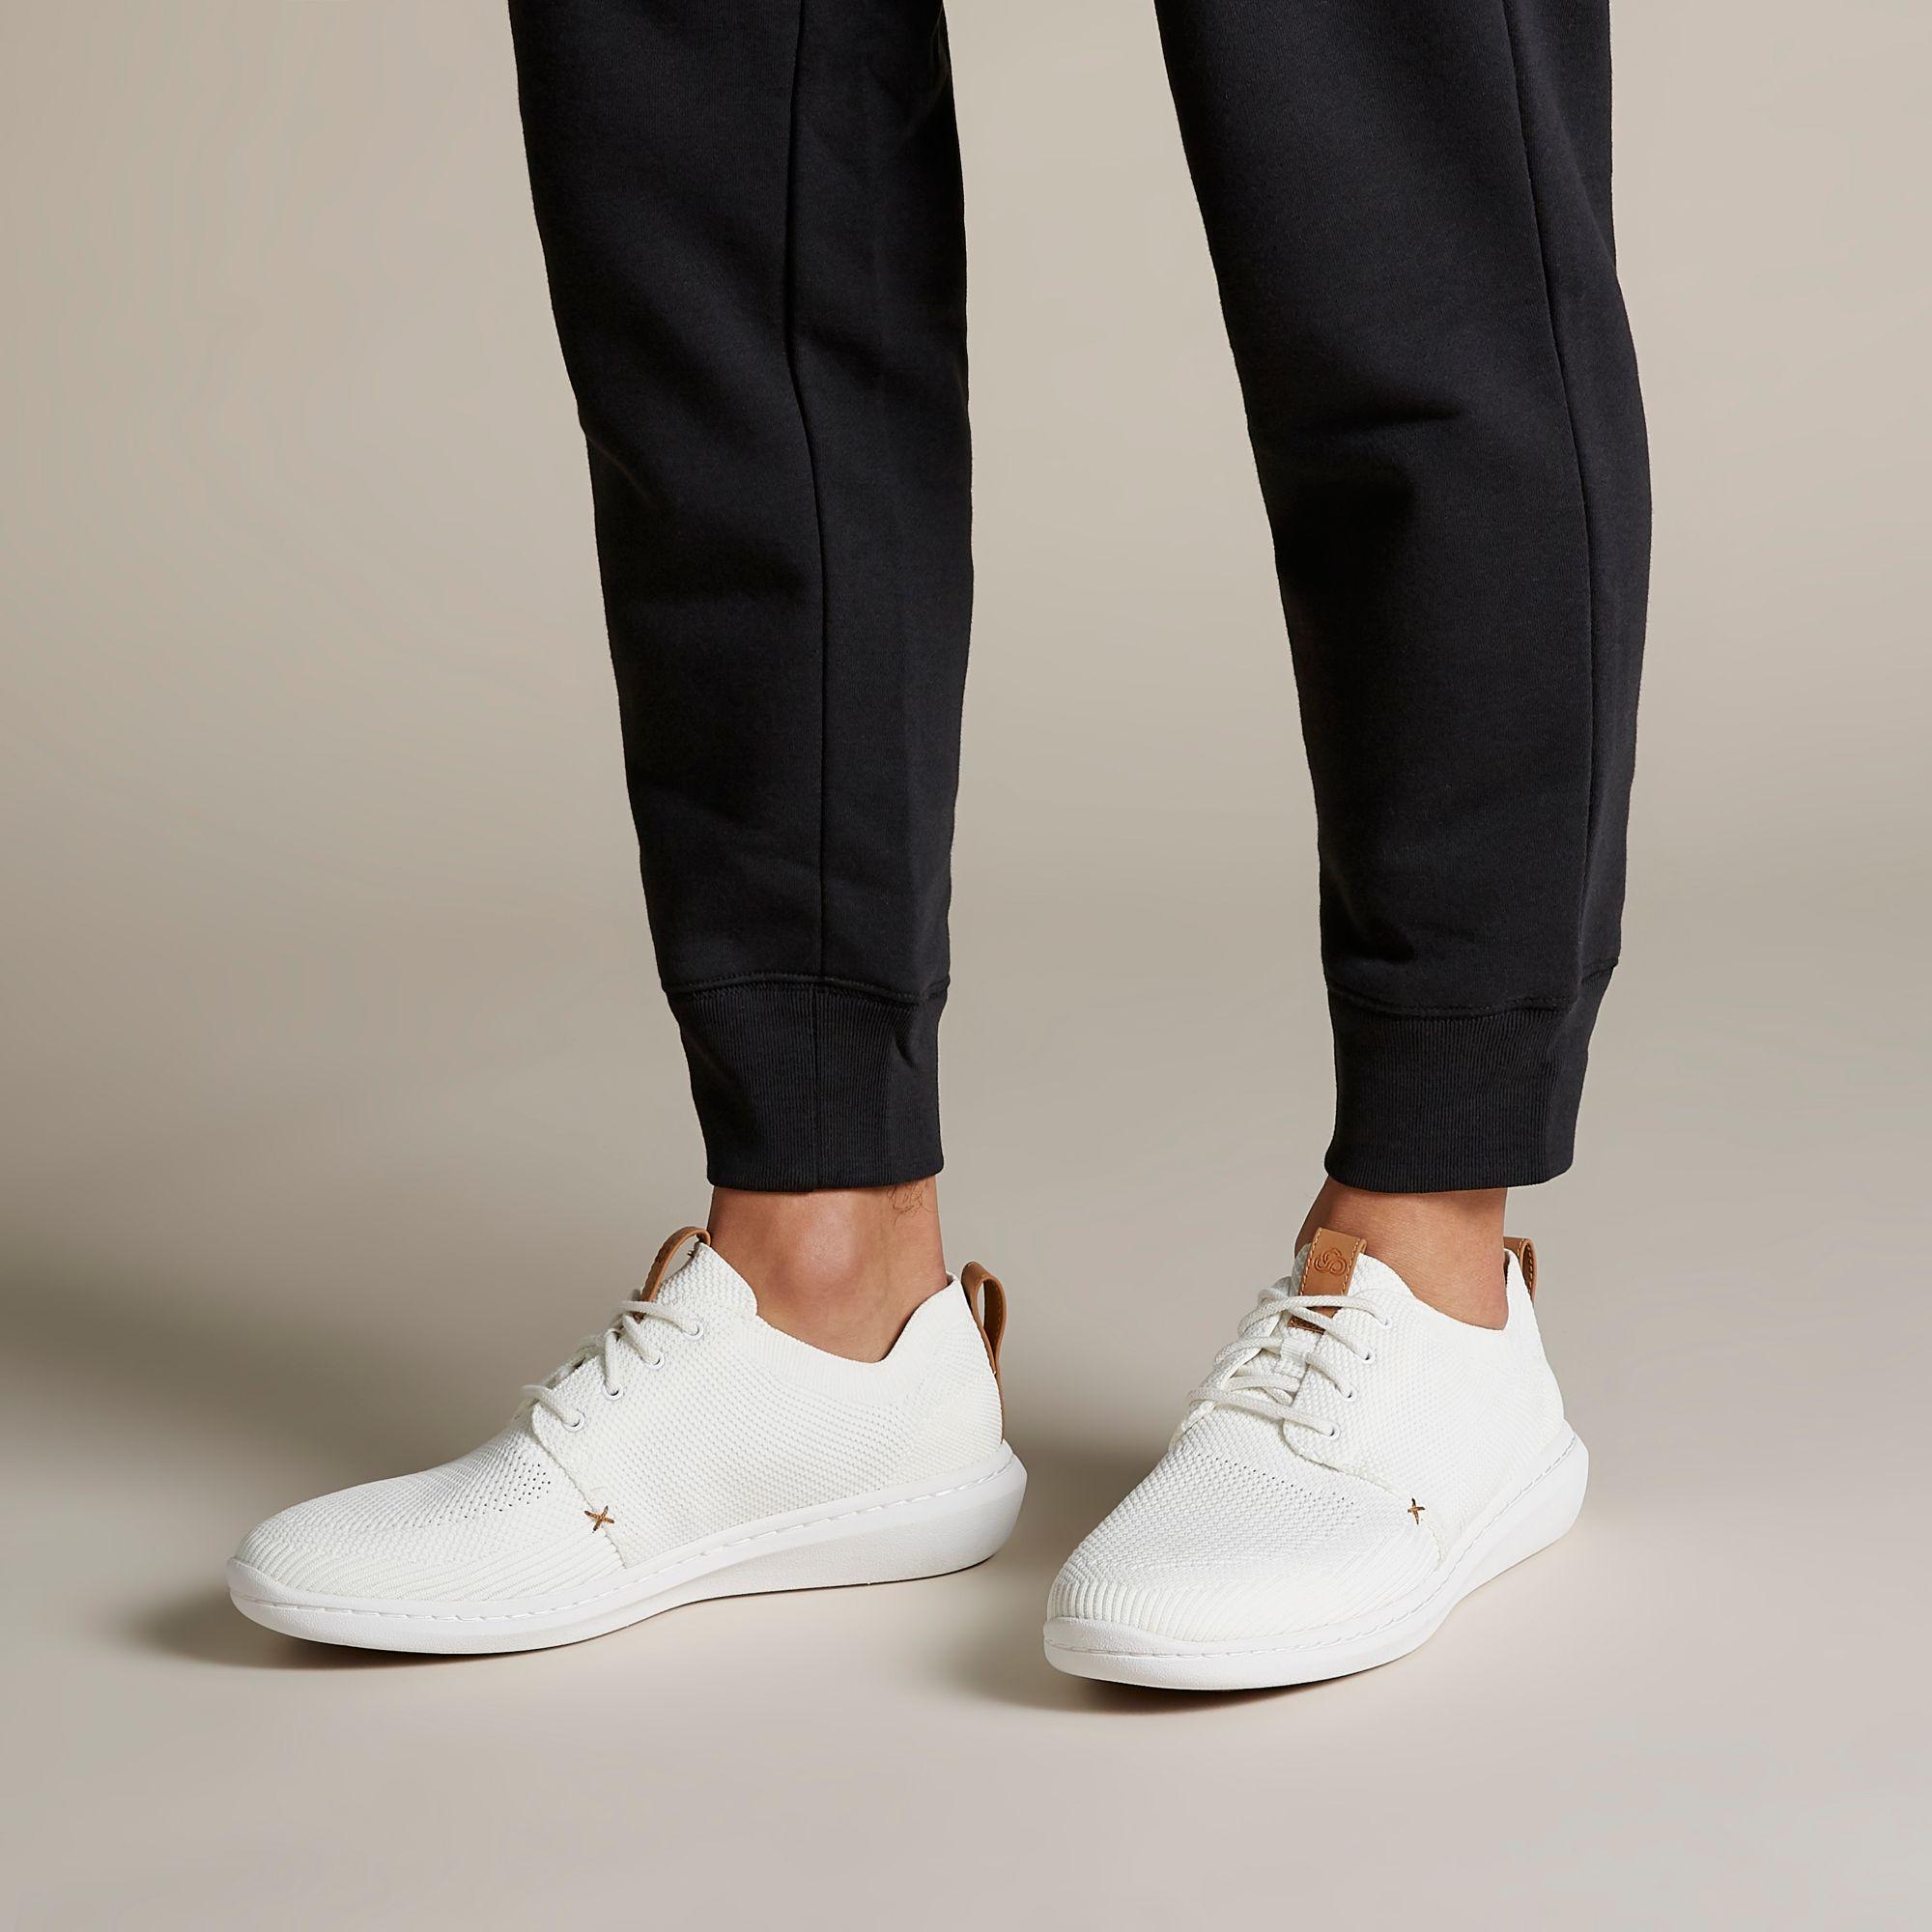 Clarks Lace Step Urban Mix in White for 